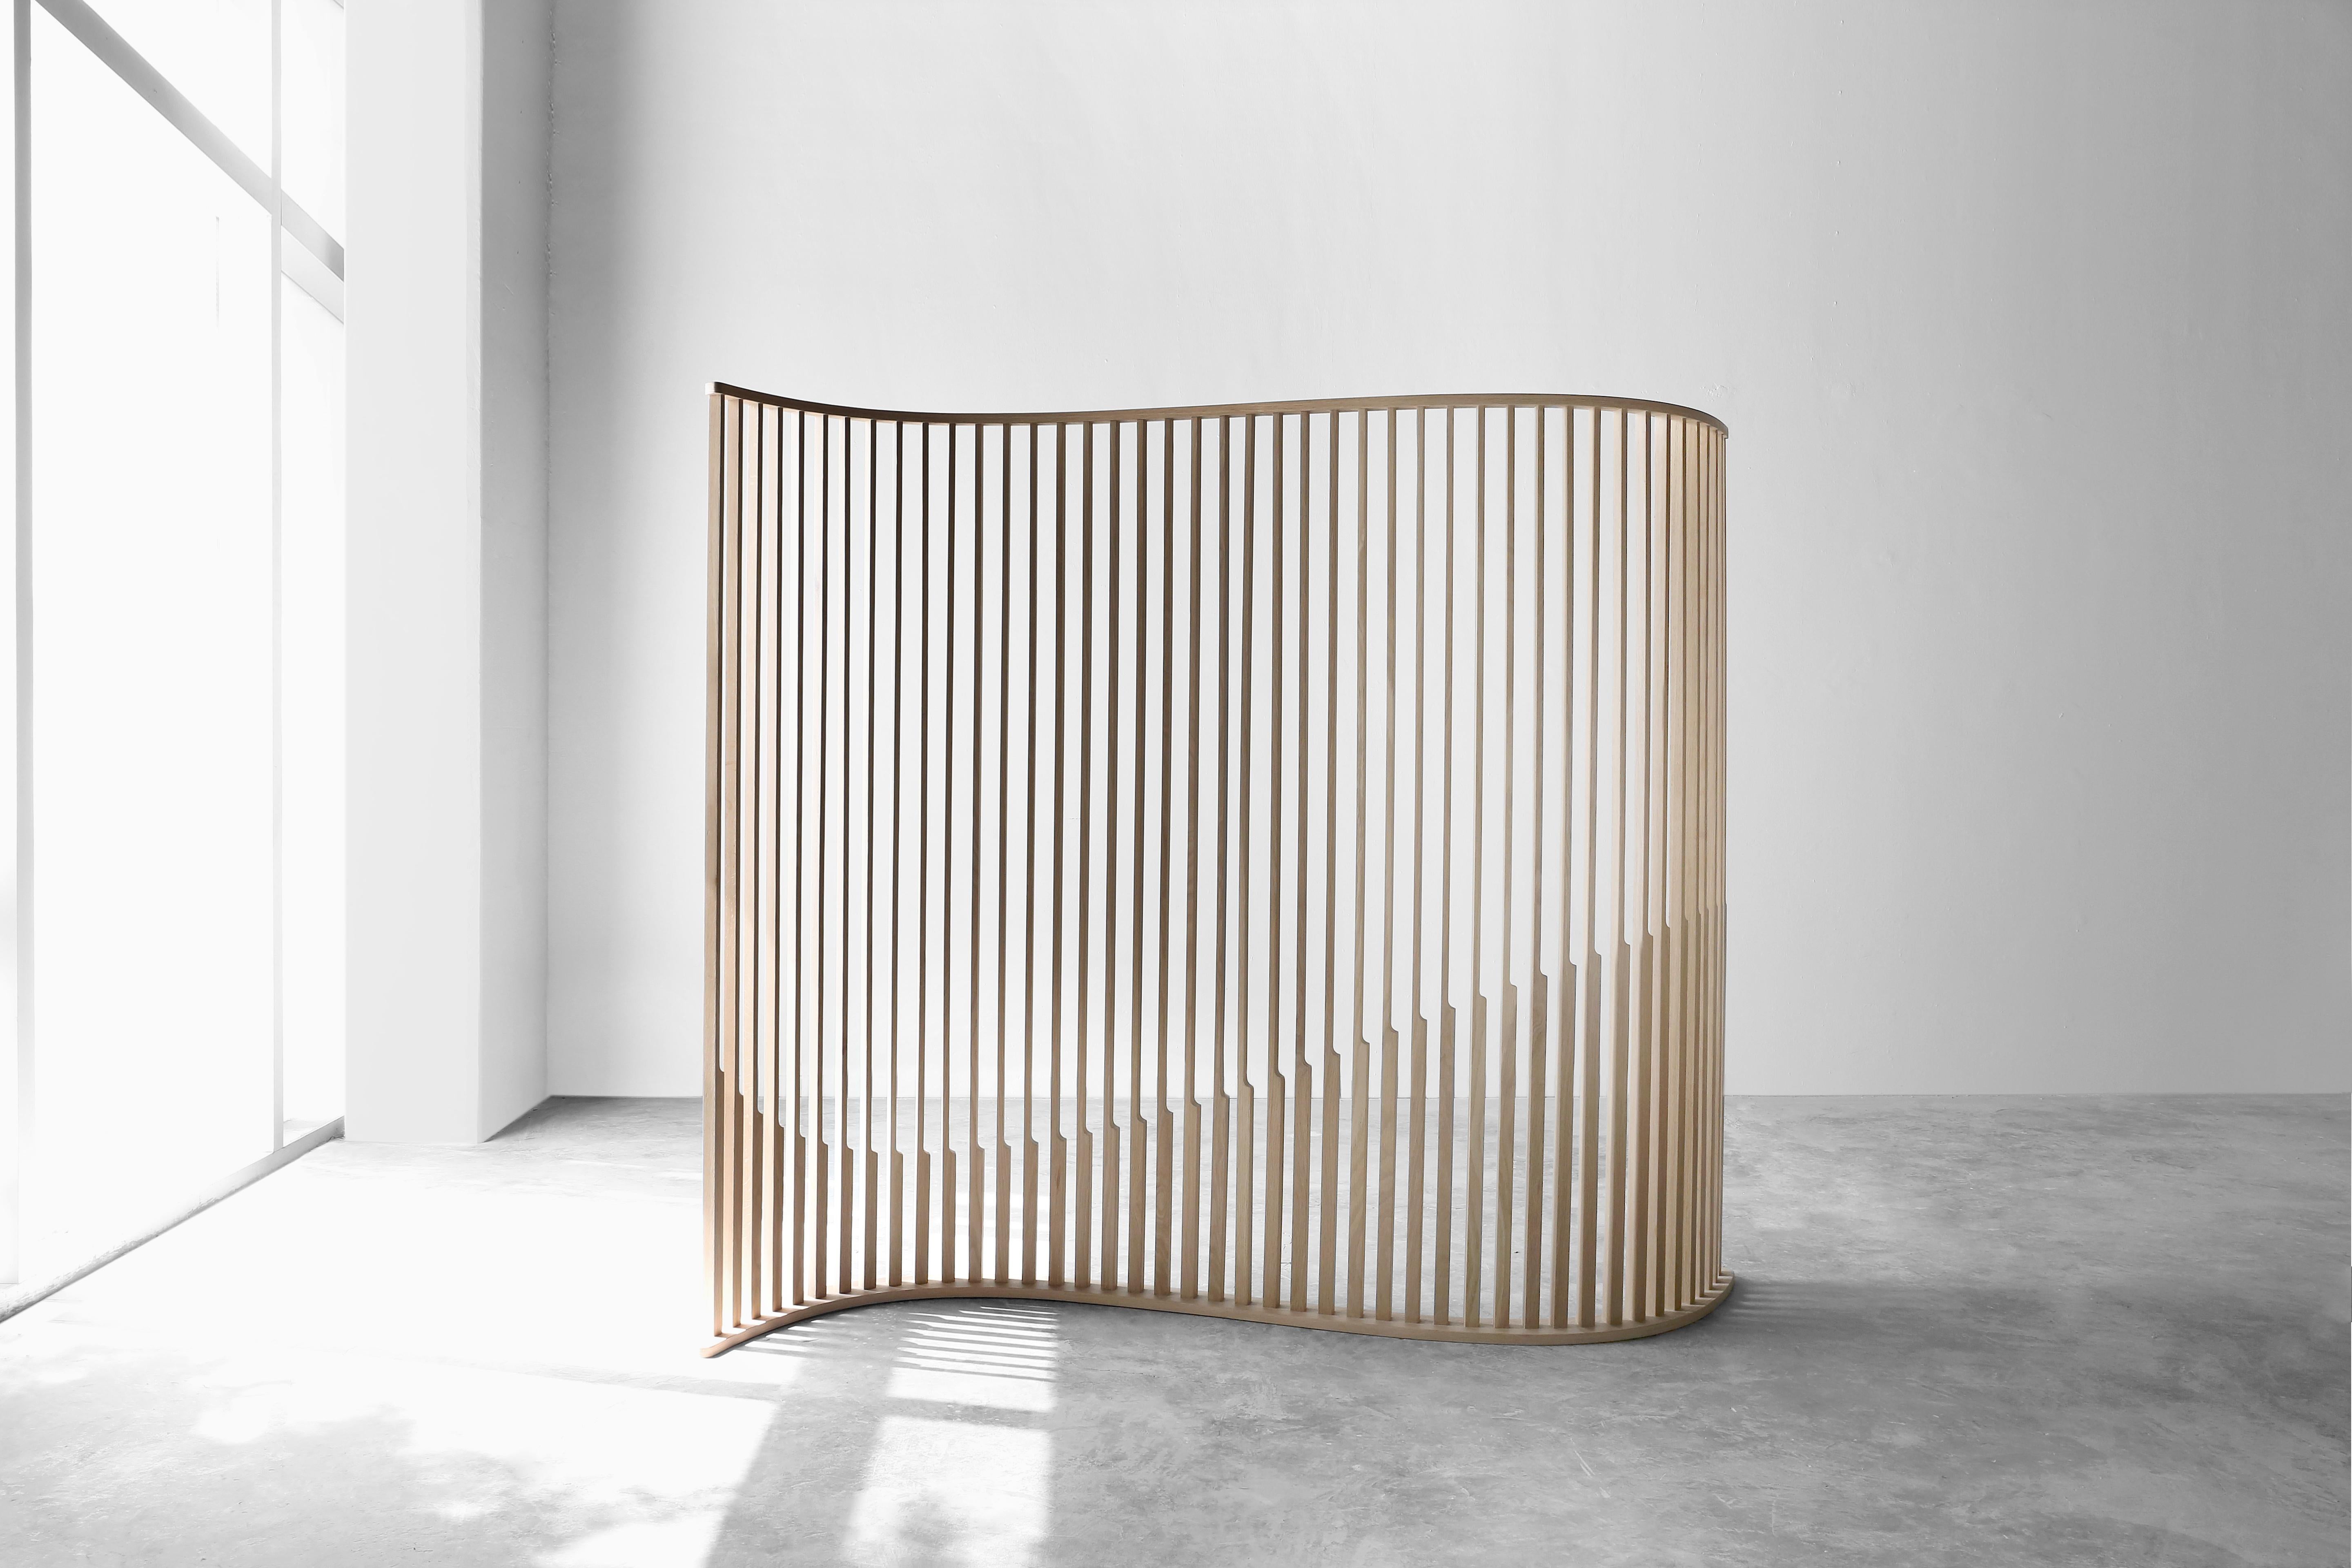 Aceleración screen by Joel Escalona
Limited edition of 9
Dimensions: D 230 x W 40 x H 187 cm
Materials: oak wood.

Natural white oak screen.

Joel Escalona
He was born in Mexico City and studied Industrial Design at the Universidad Autónoma